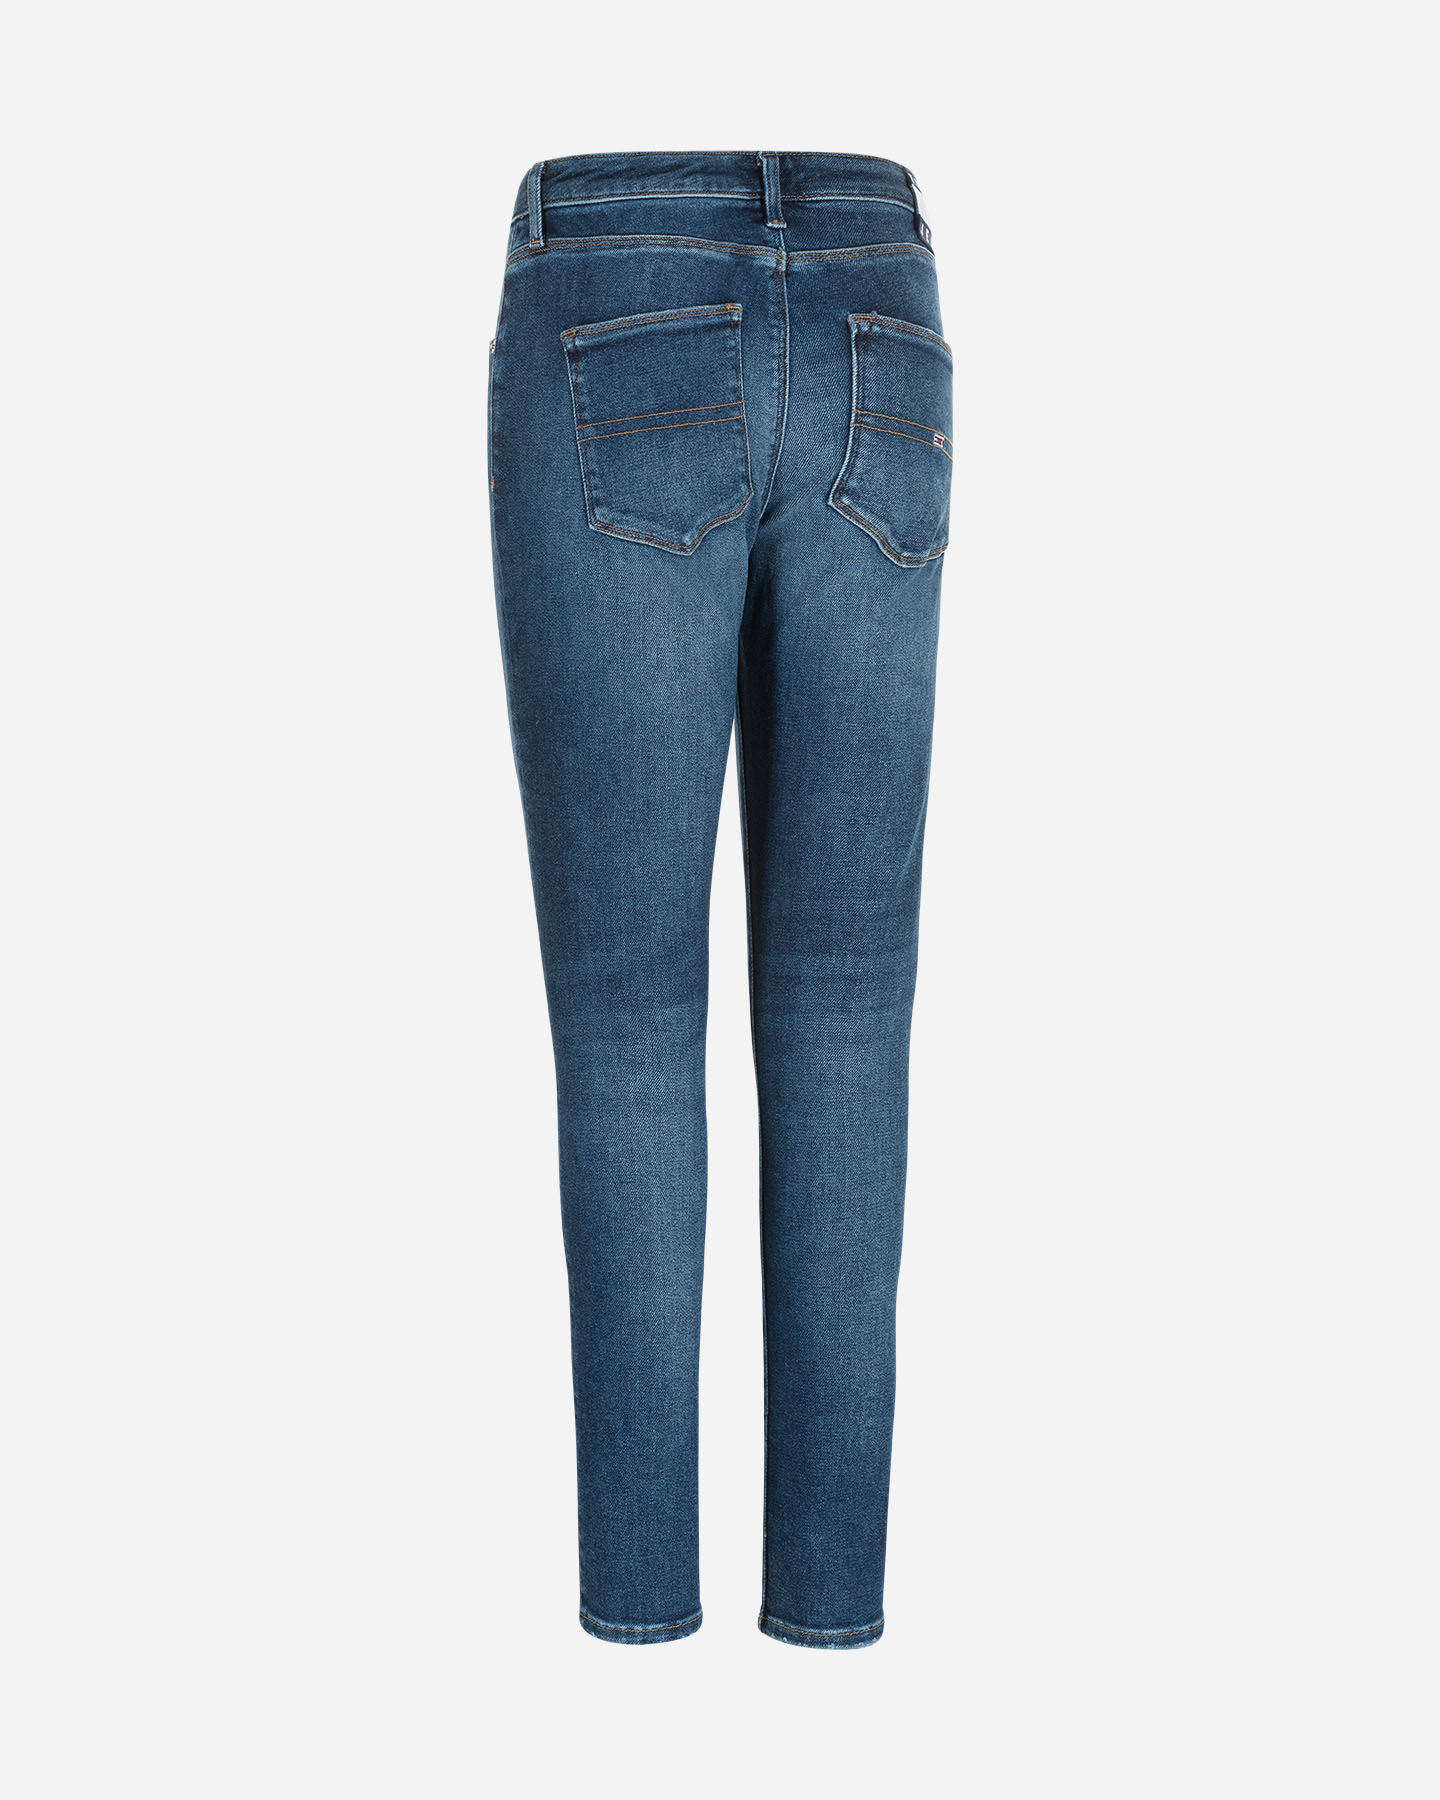  Jeans TOMMY HILFIGER SUPER SKINNY W S4083531|1BJ|26 scatto 1